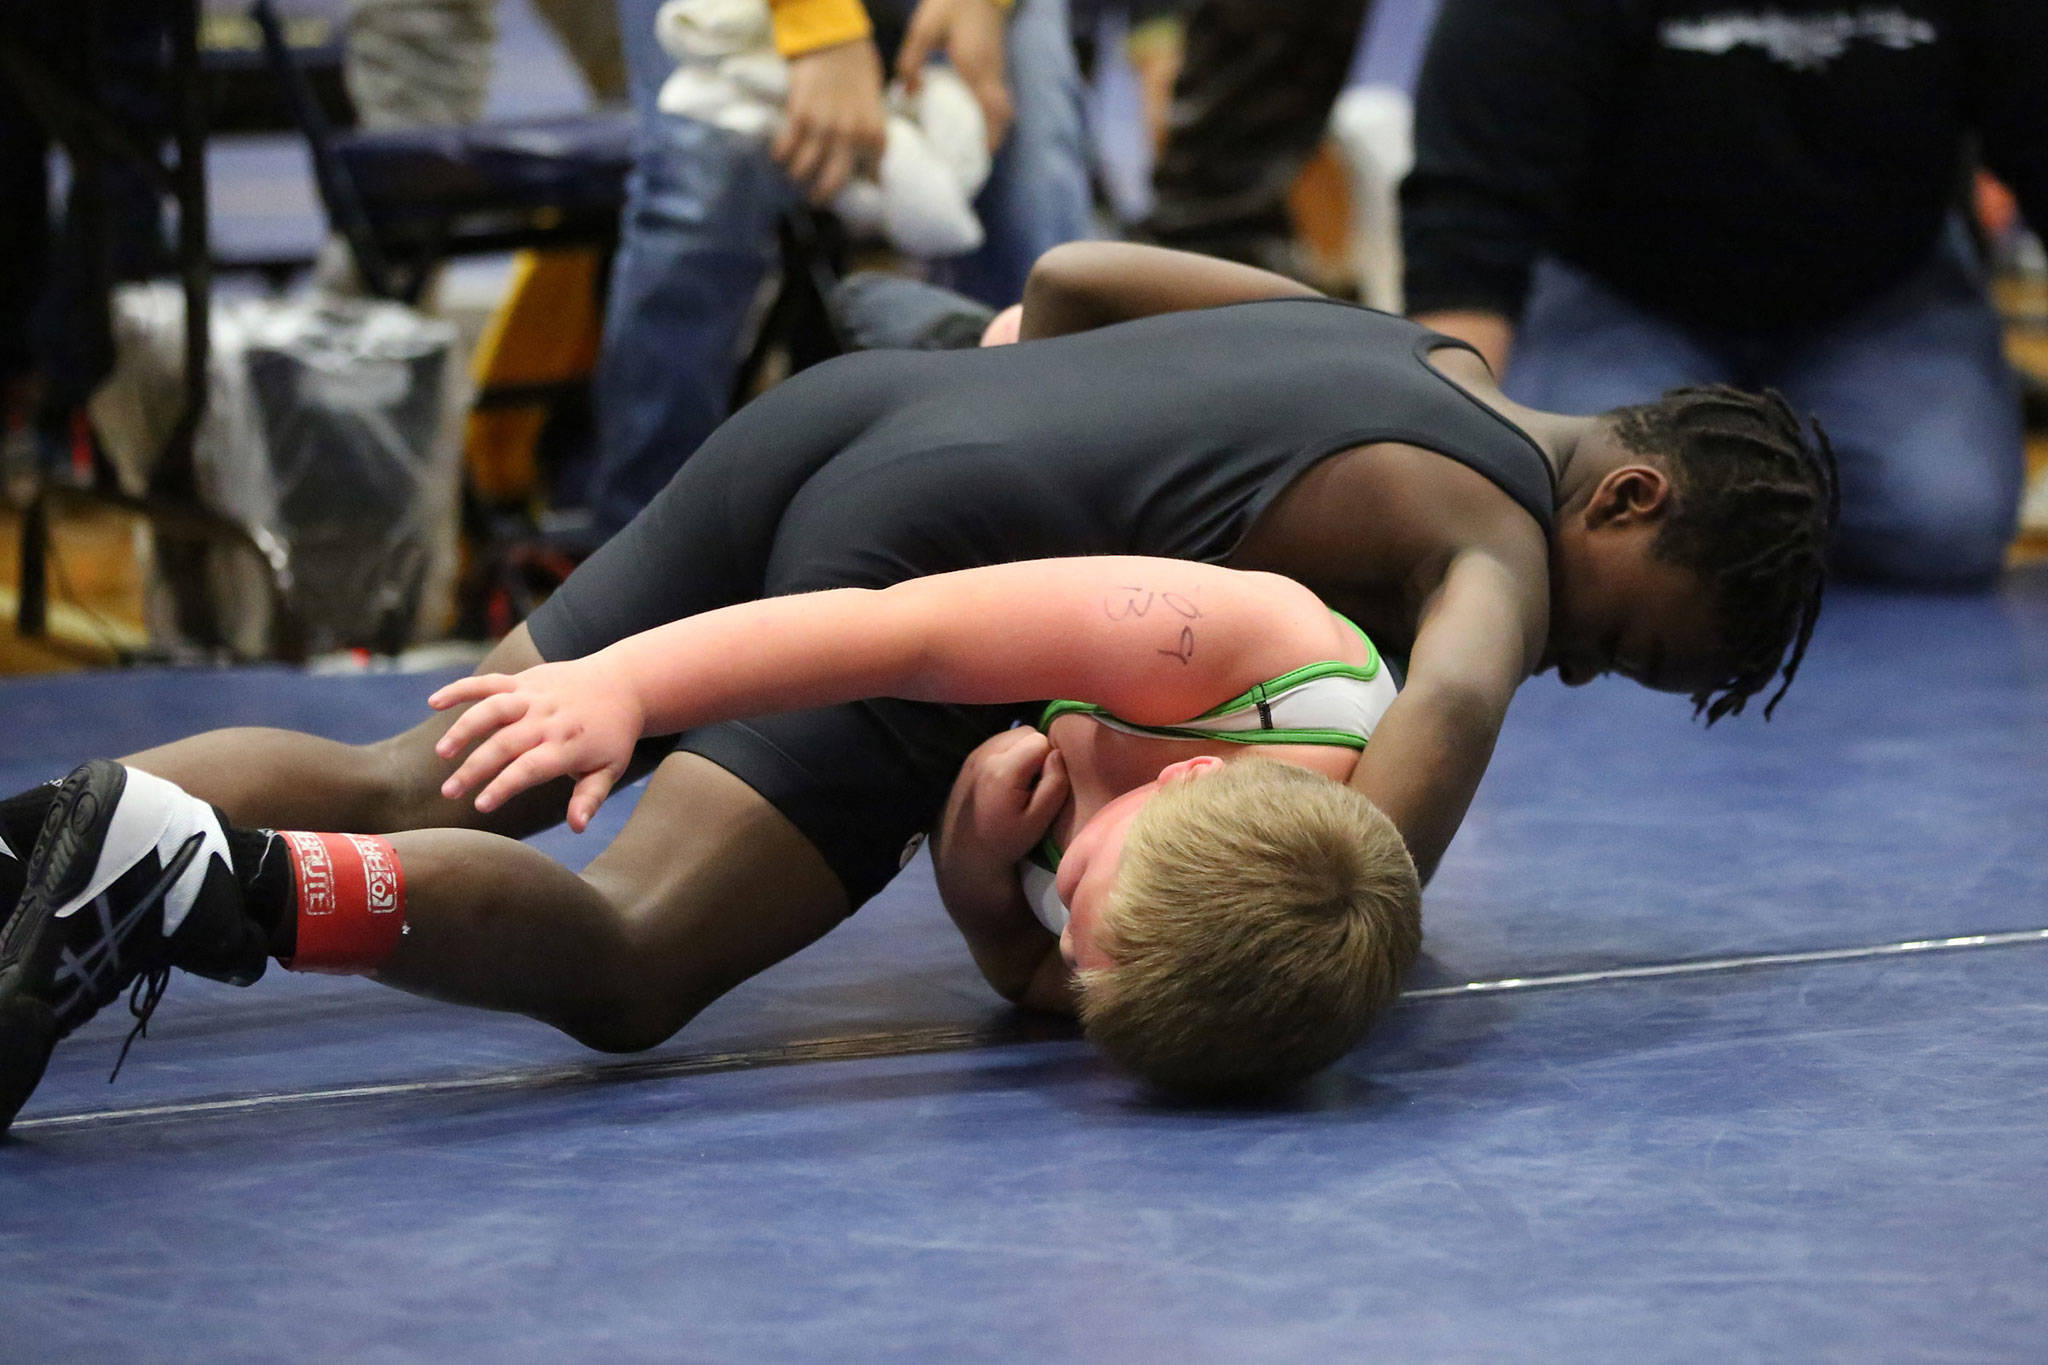 Oak Harbor Wrestling Club’s Jordan Wilson turns his opponent on the way to winning his weight division at the Yellowjacket Challenge last weekend. (Photo by John Fisken)